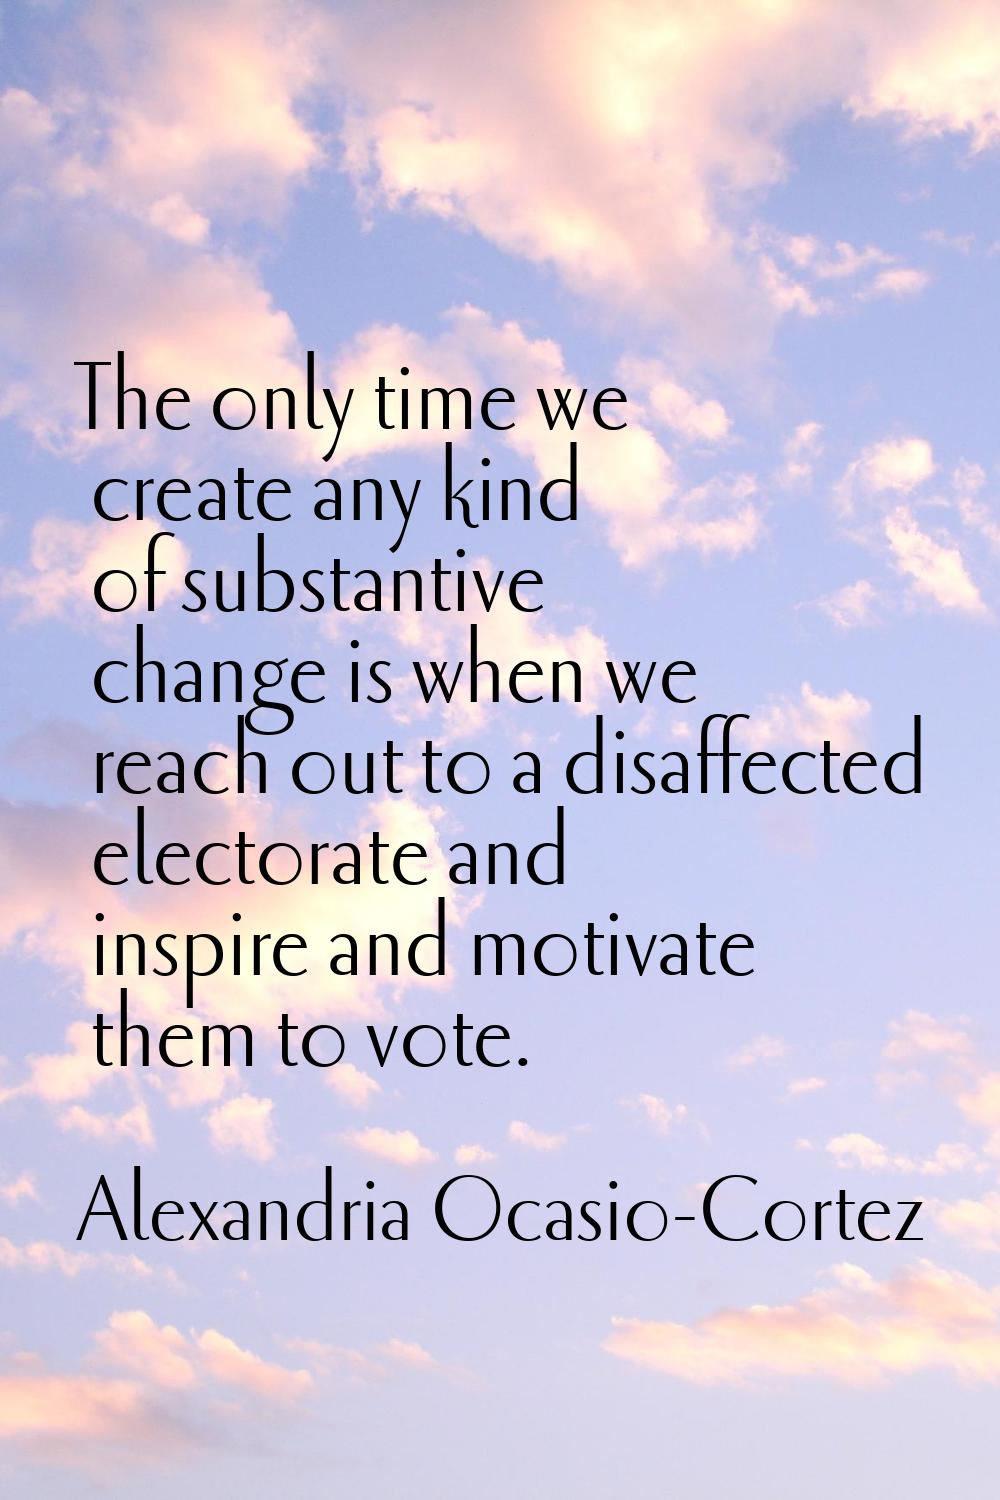 The only time we create any kind of substantive change is when we reach out to a disaffected electo